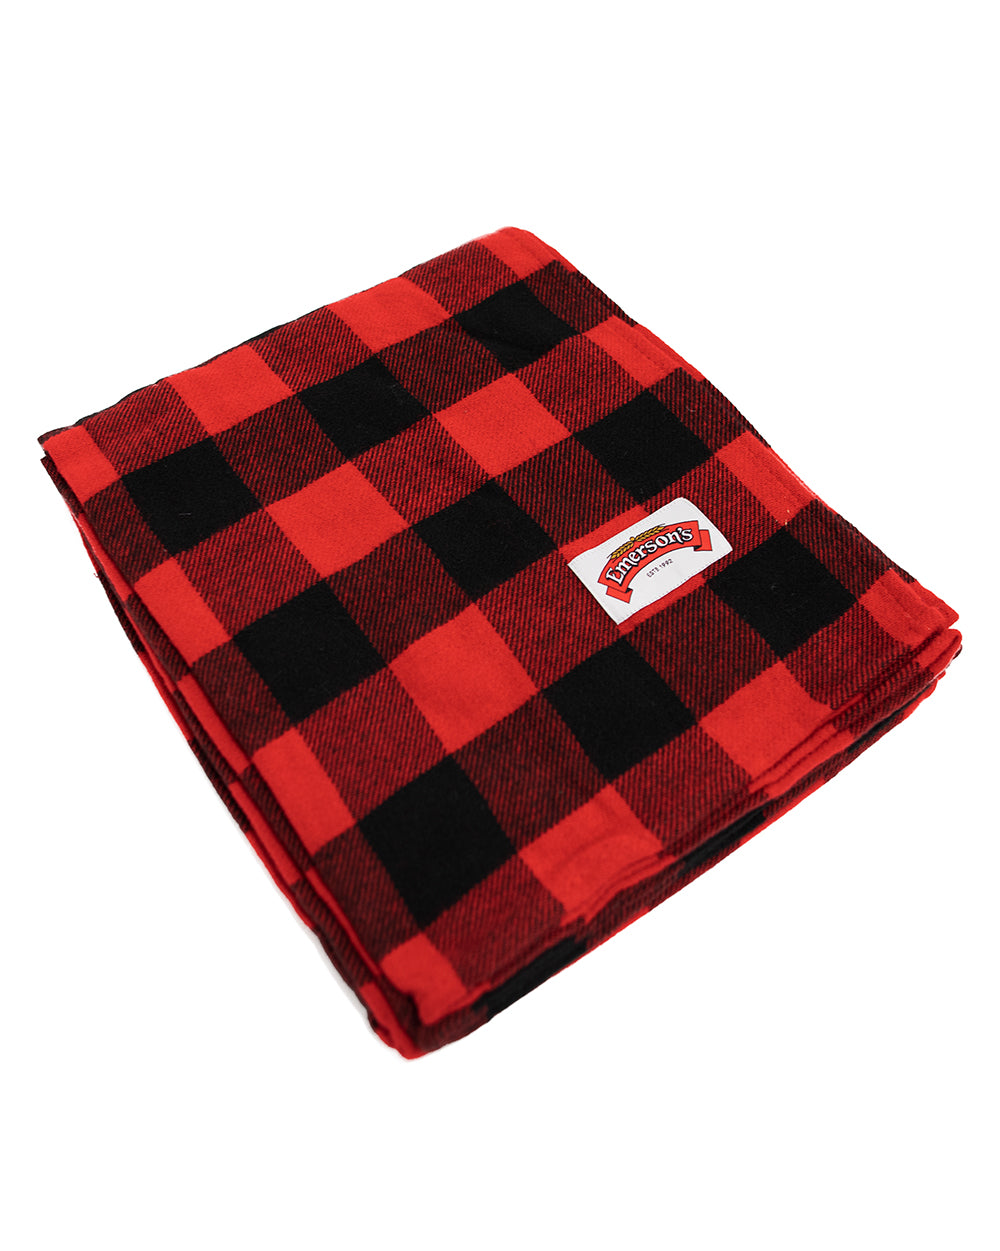 Emerson's Blanket -  Beer Gear Apparel & Merchandise - Speights - Lion Red - VB - Tokyo Dy merch